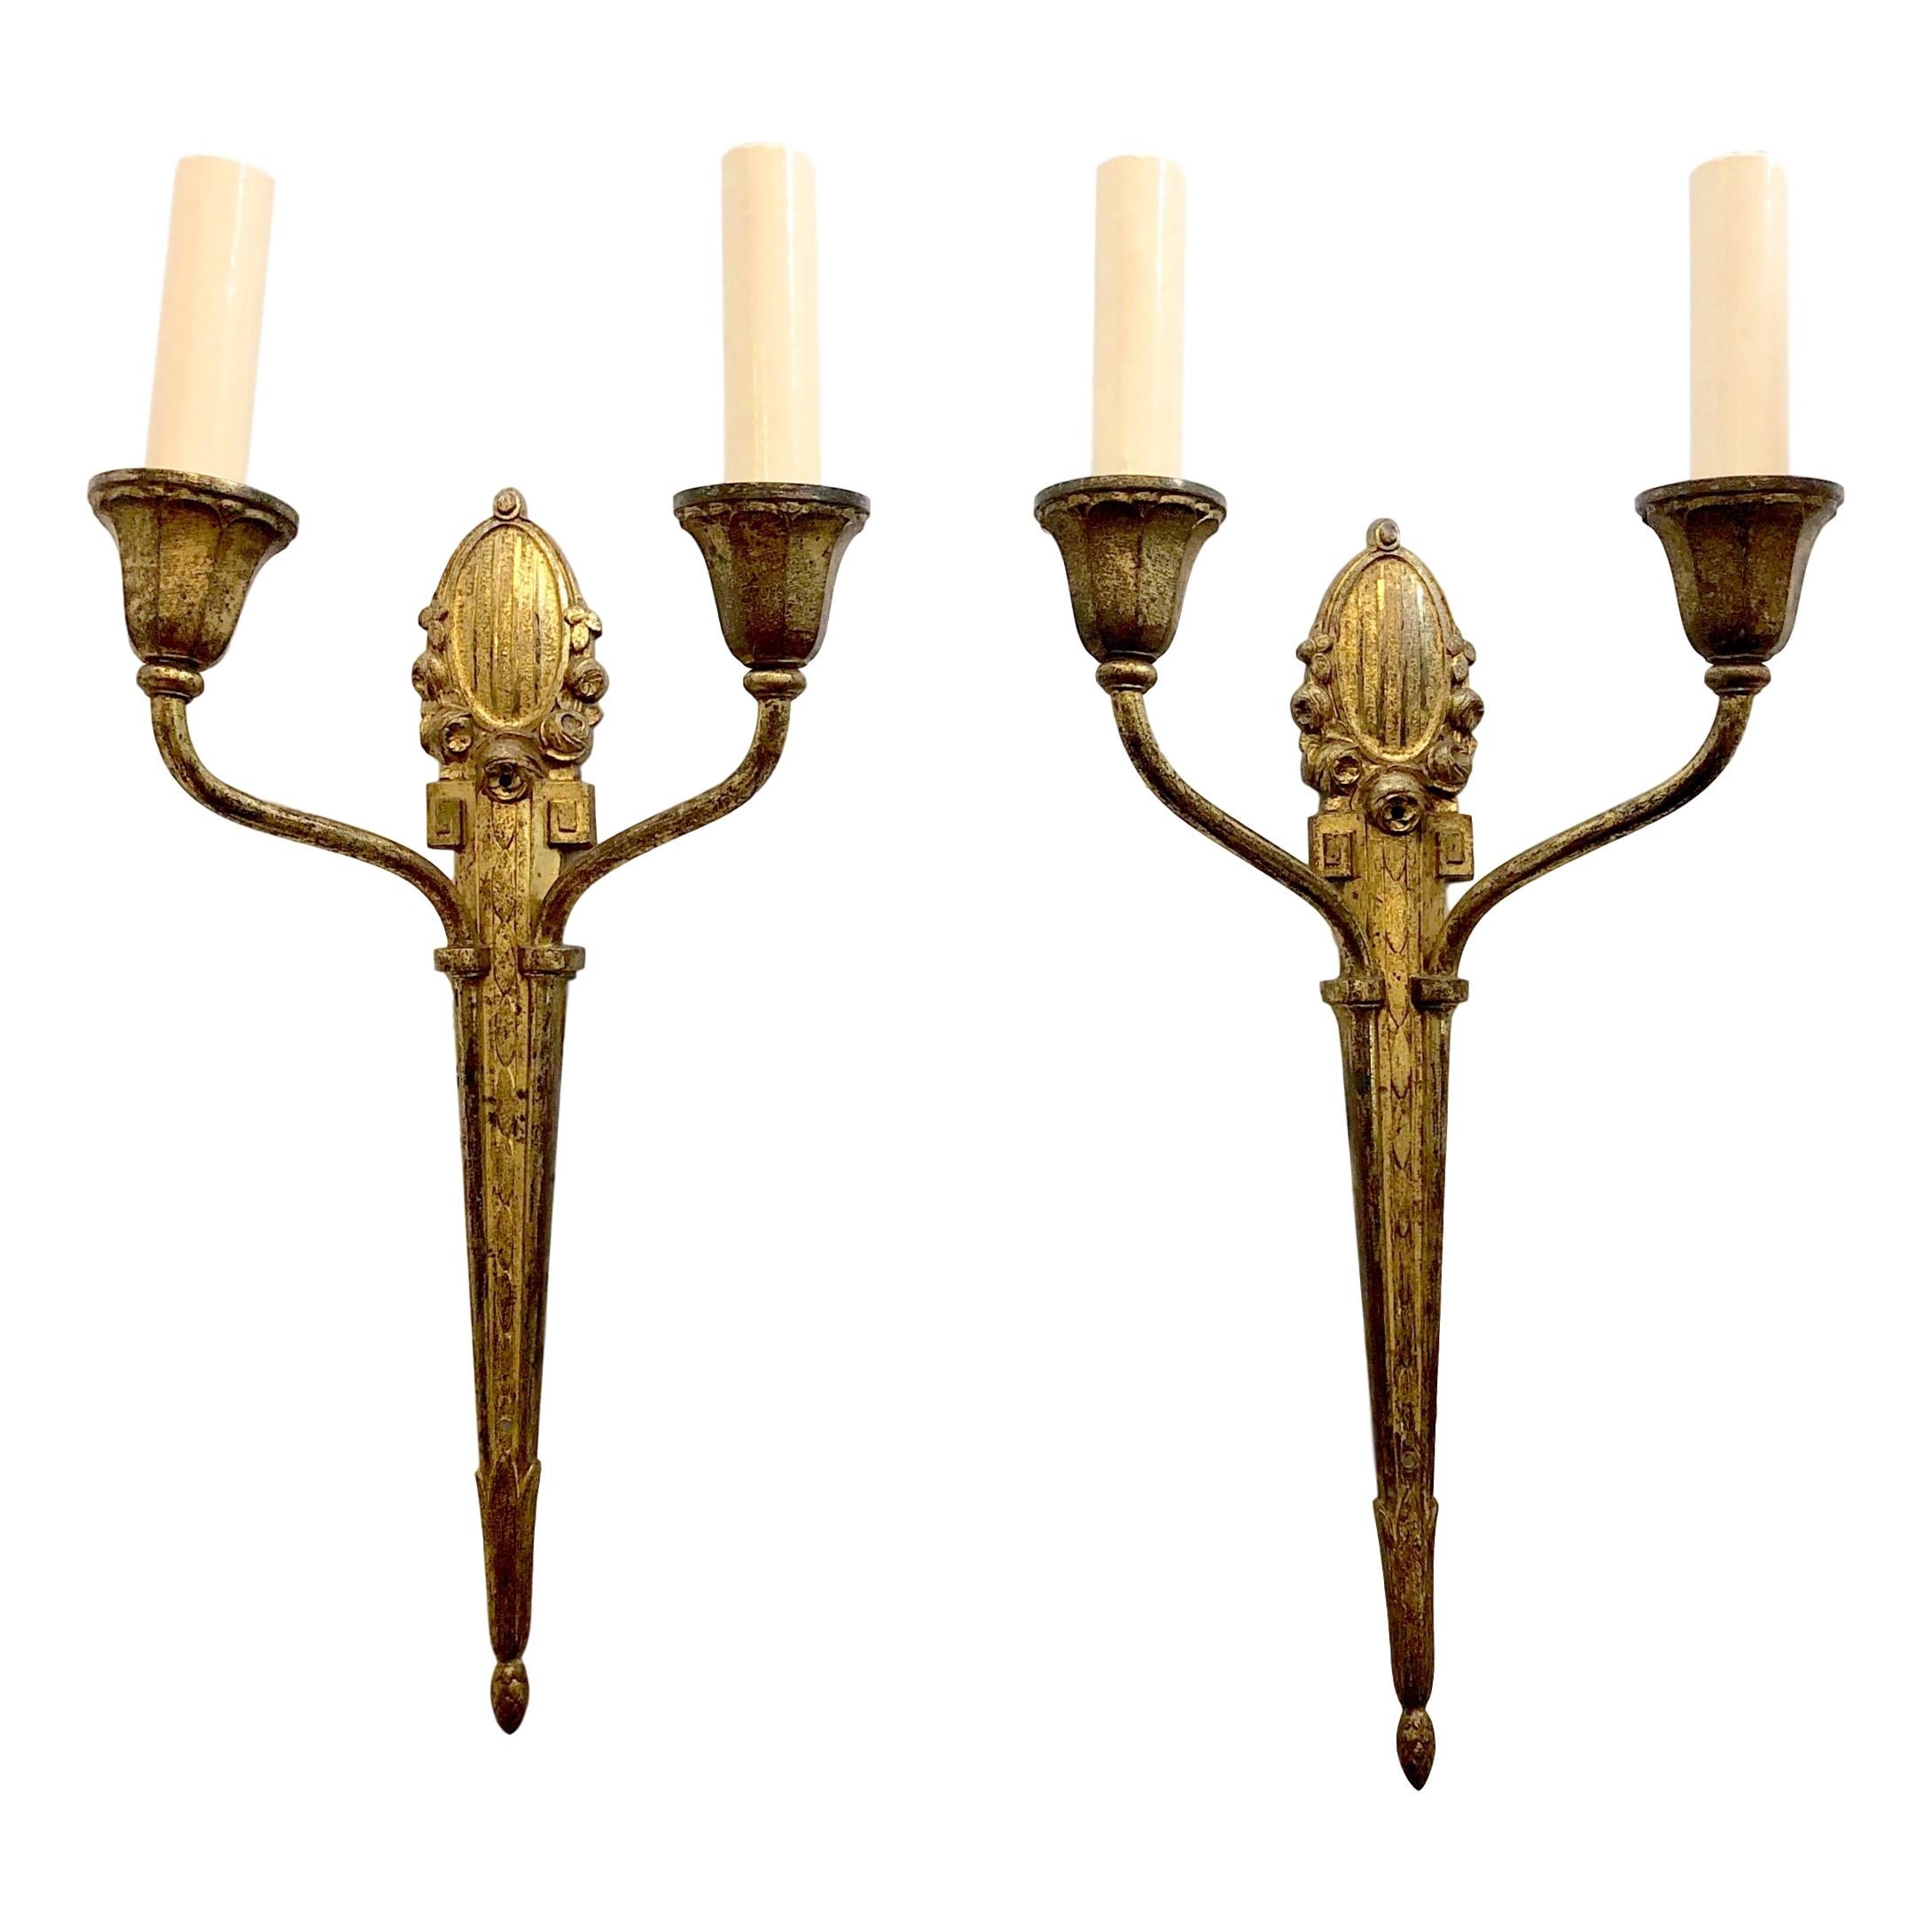 Pair of circa 1910 French gilt bronze sconces with 2 lights.

Measurements:
Height: 16